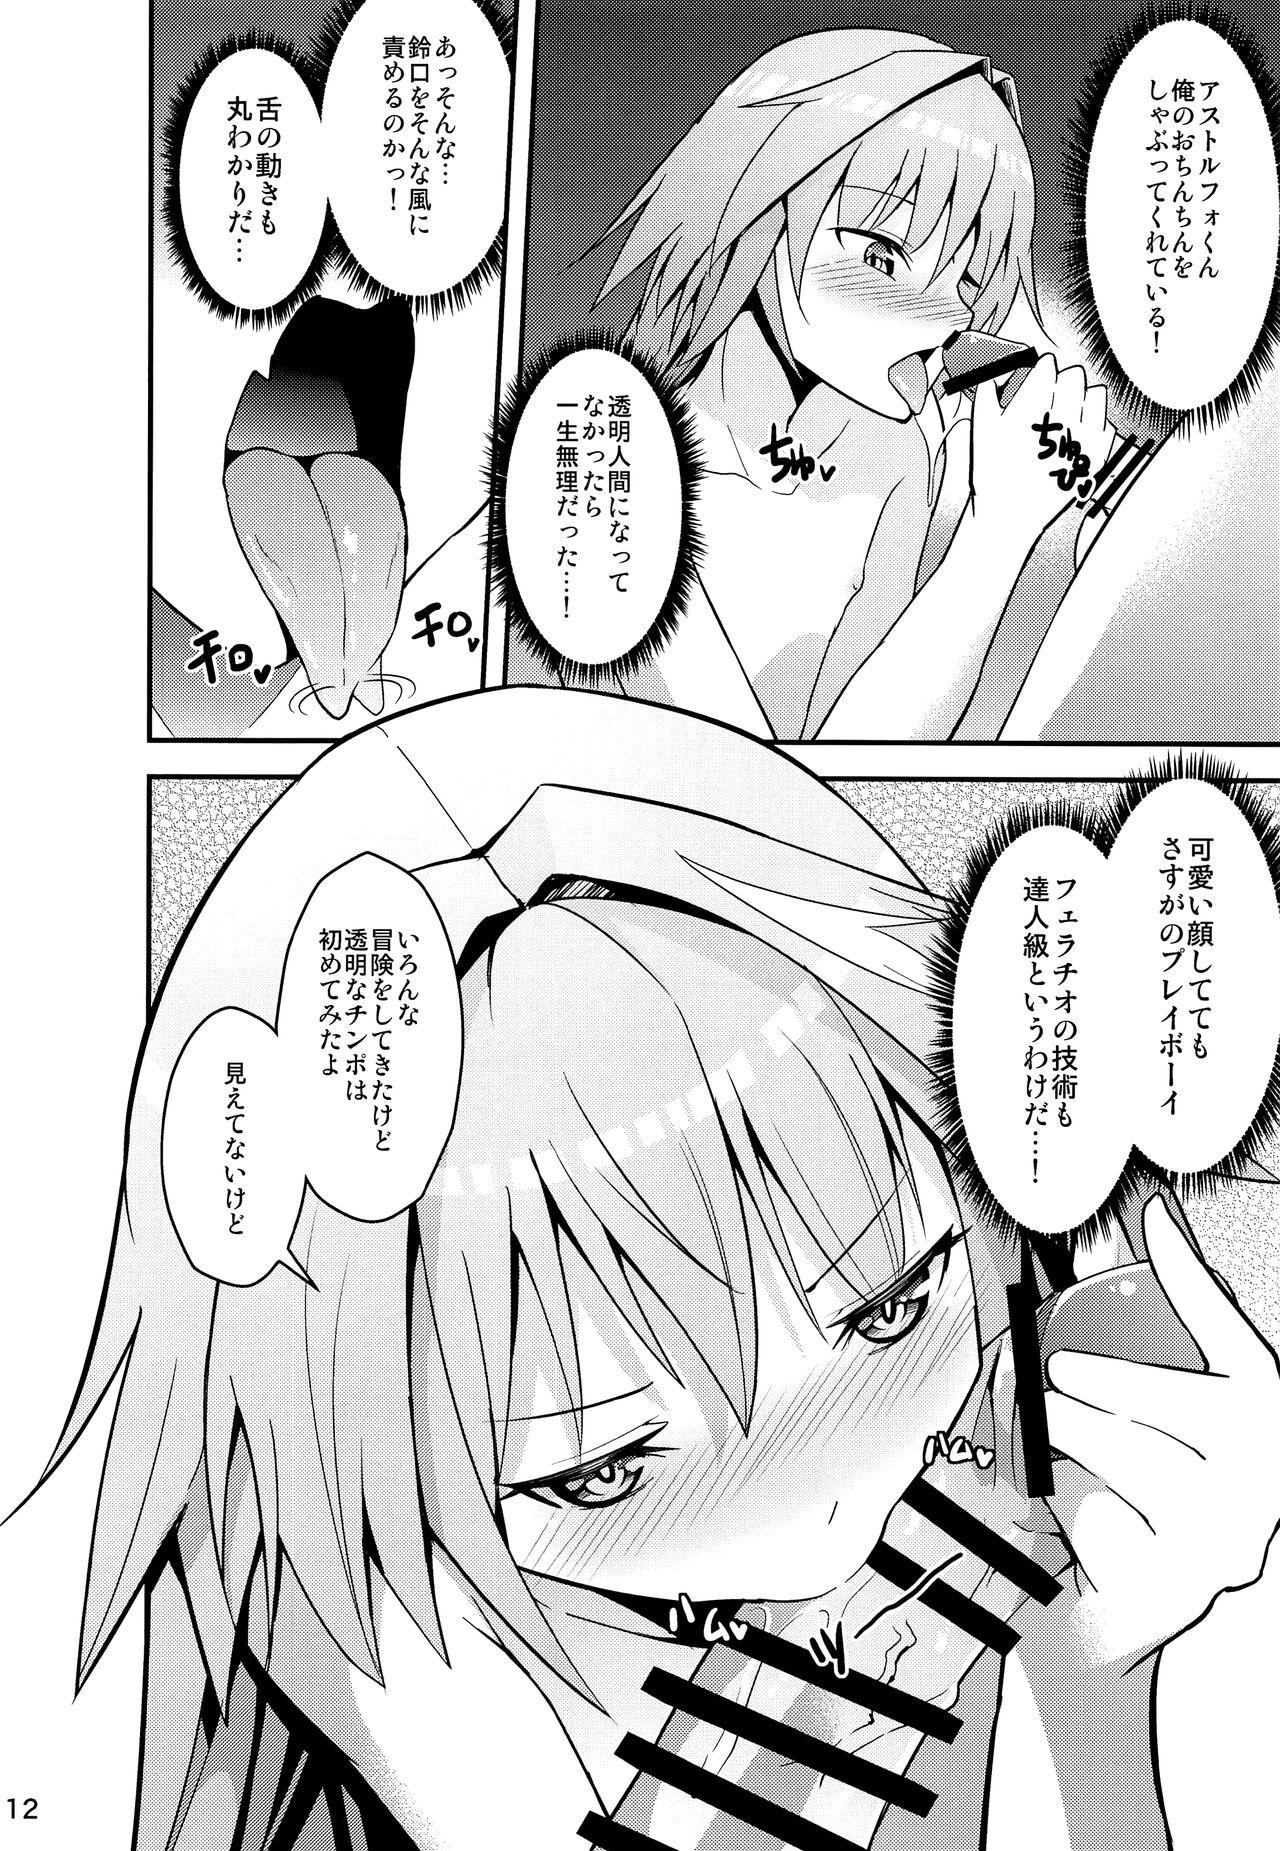 Best Blowjobs Ever Astolfo VS Toumei Ningen - Fate grand order Perrito - Page 11